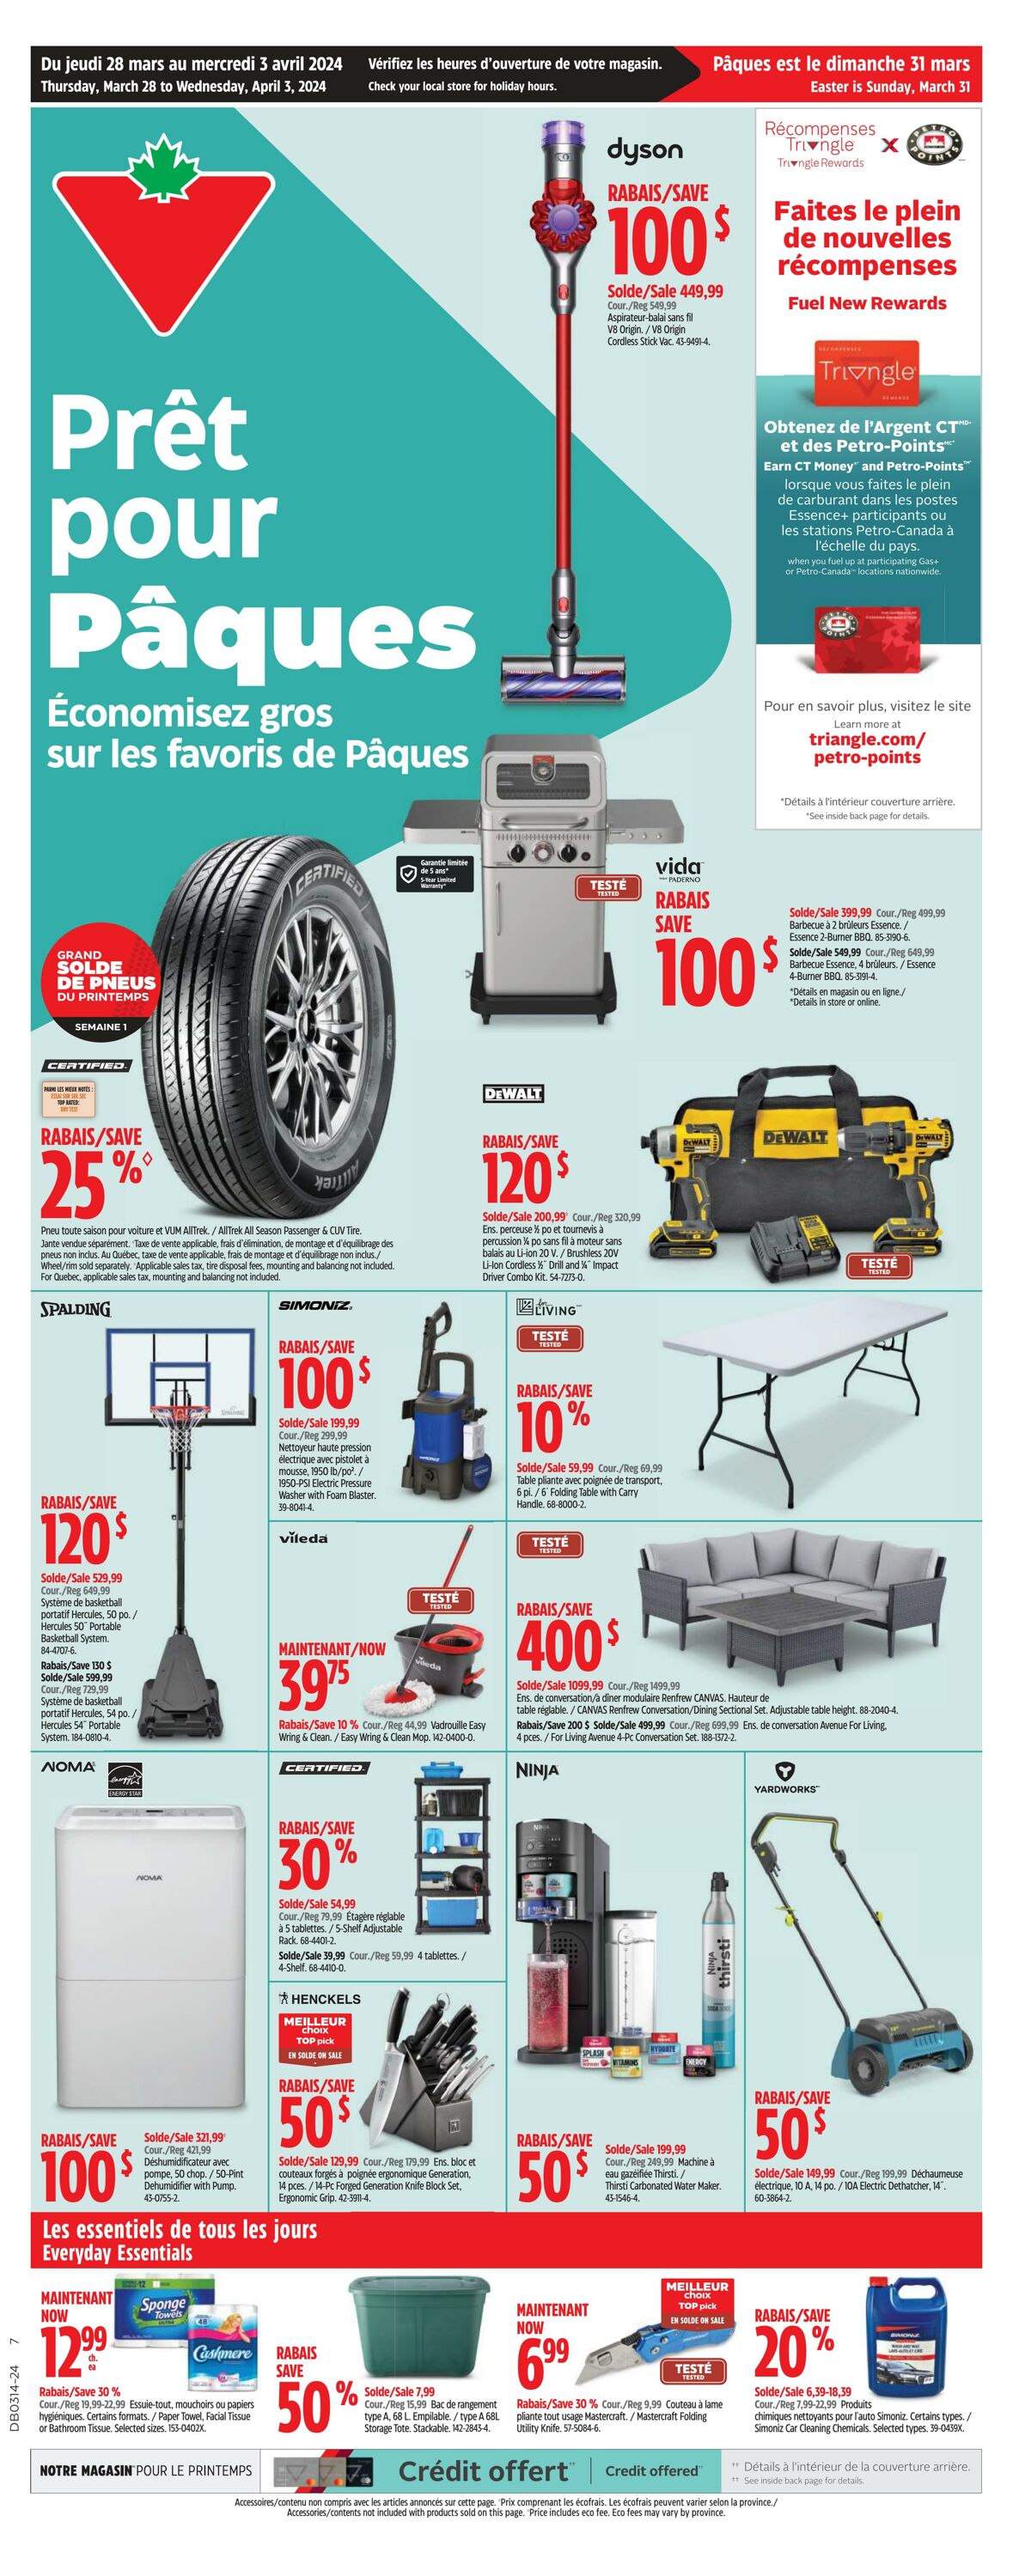 Circulaire Canadian Tire - Canadian Tire 28 mars 2024 - 3 avr. 2024